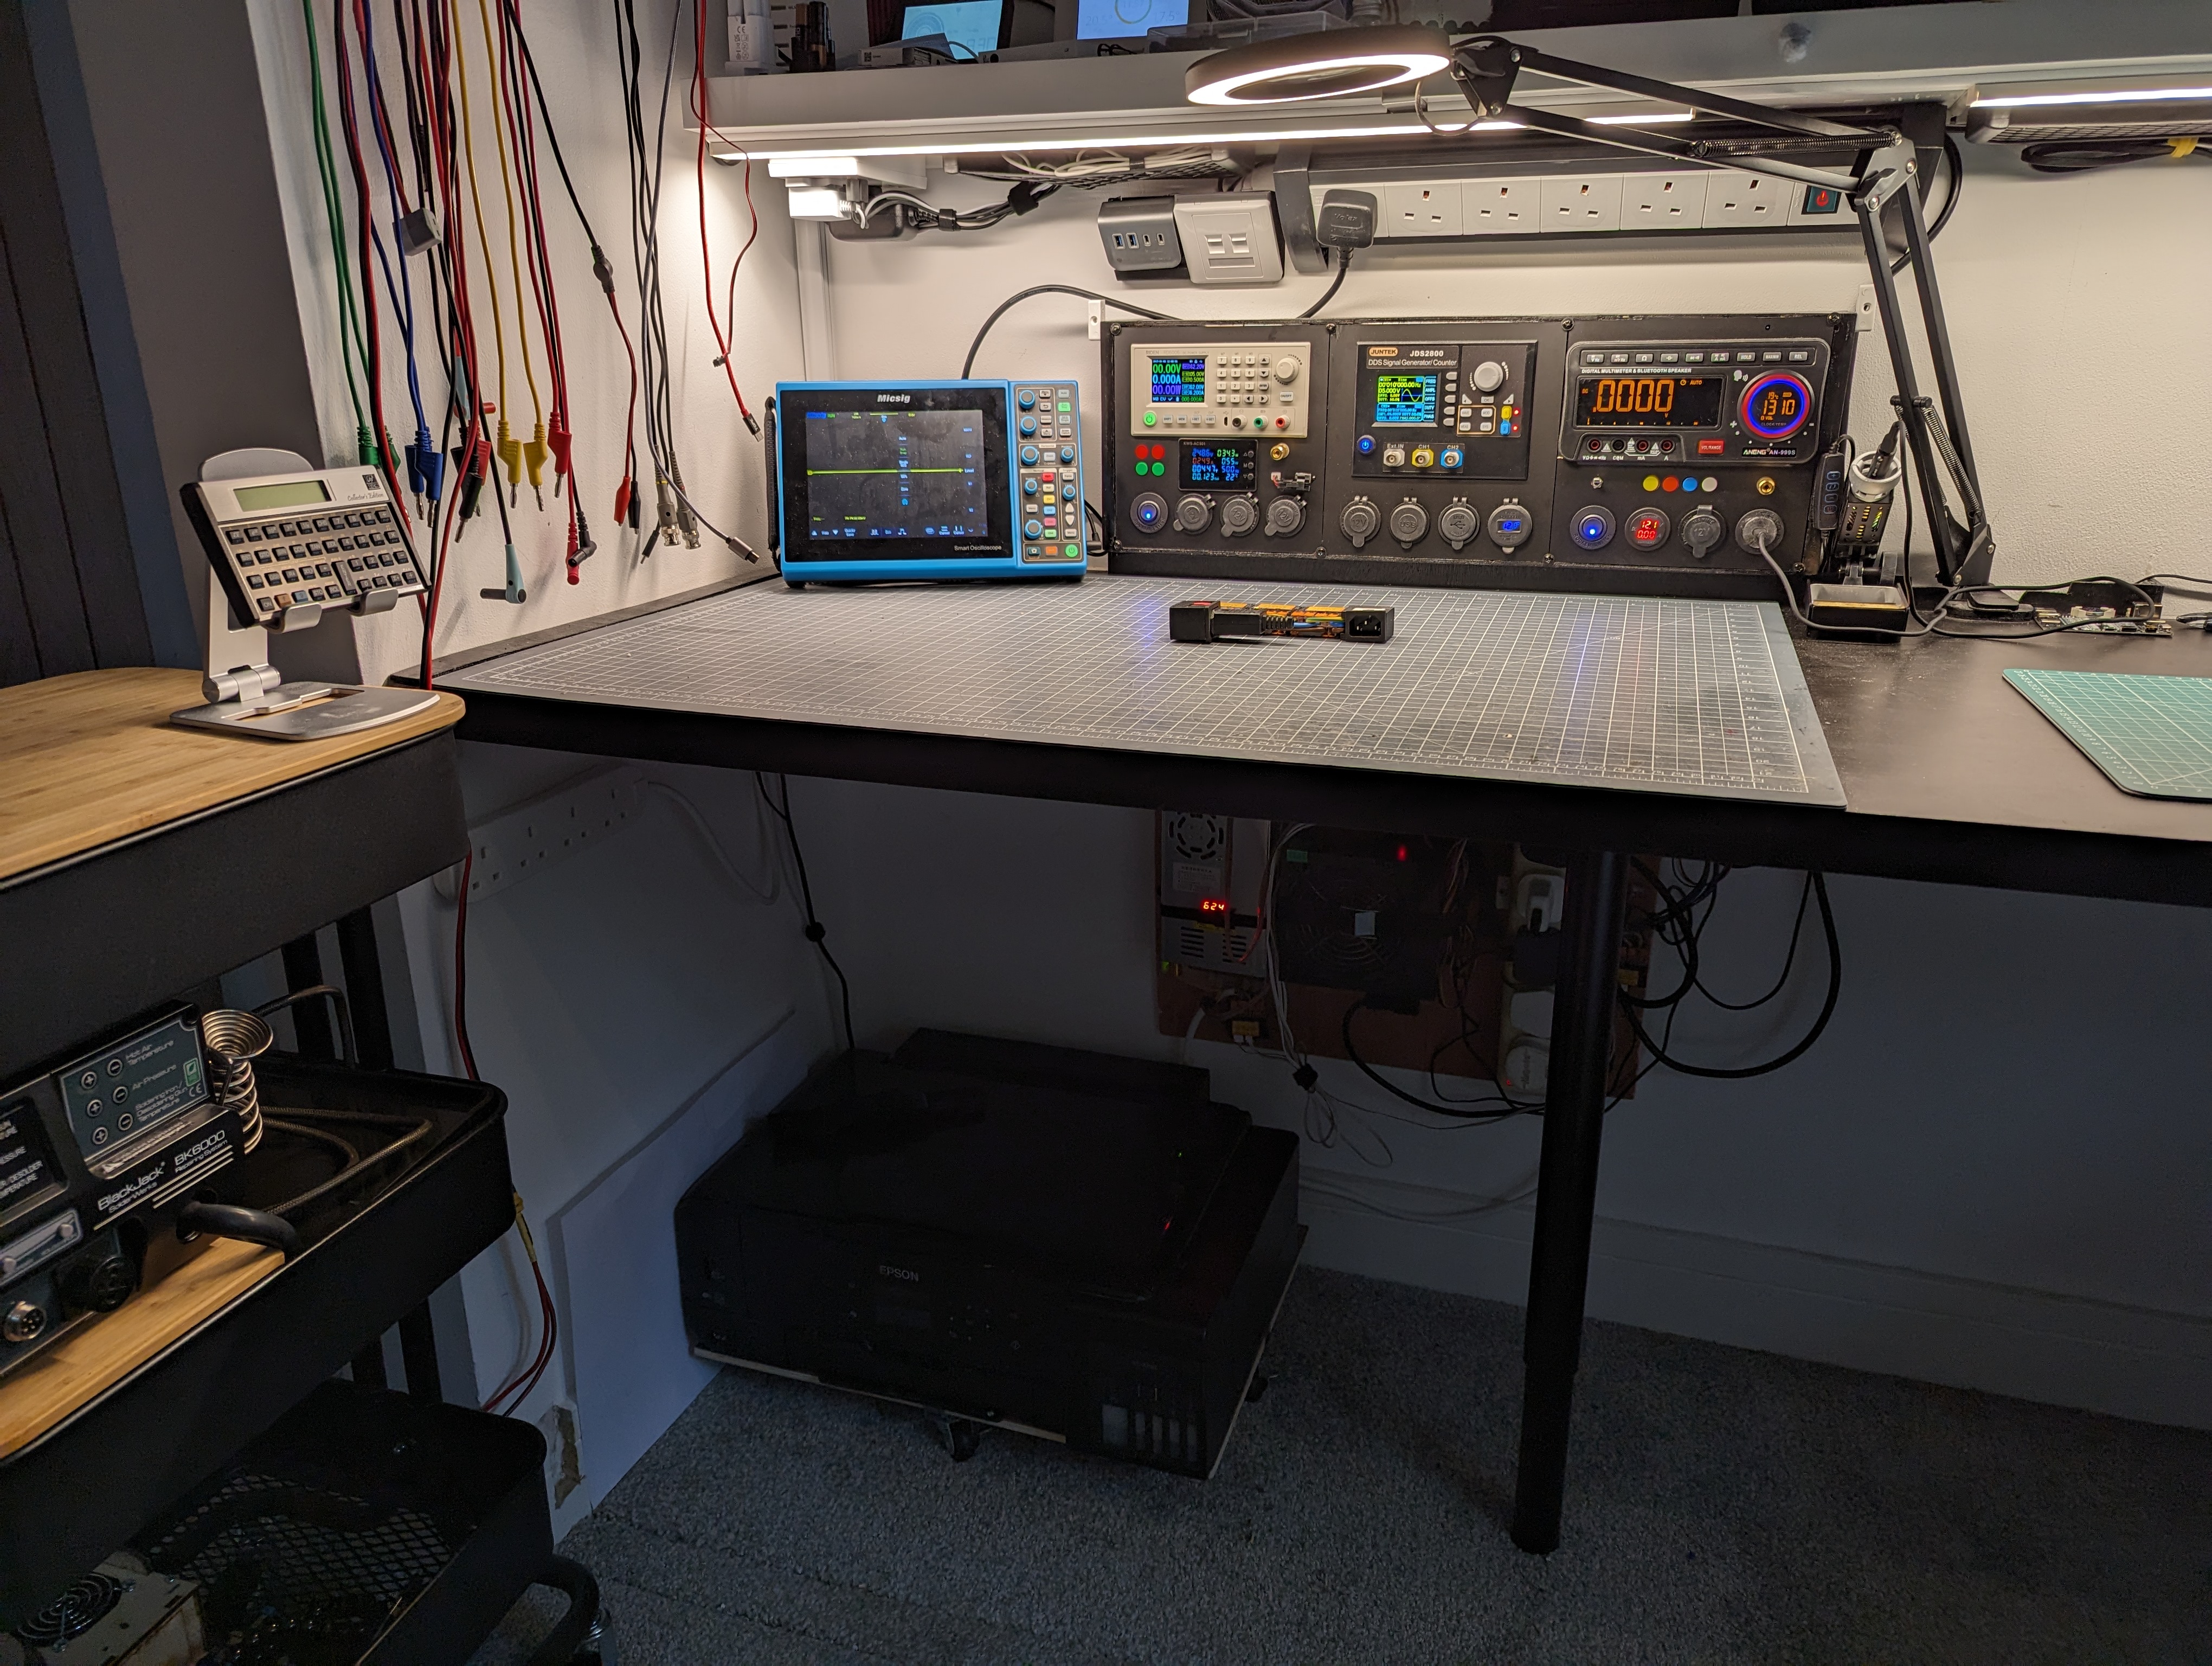 Workspace for electronics.